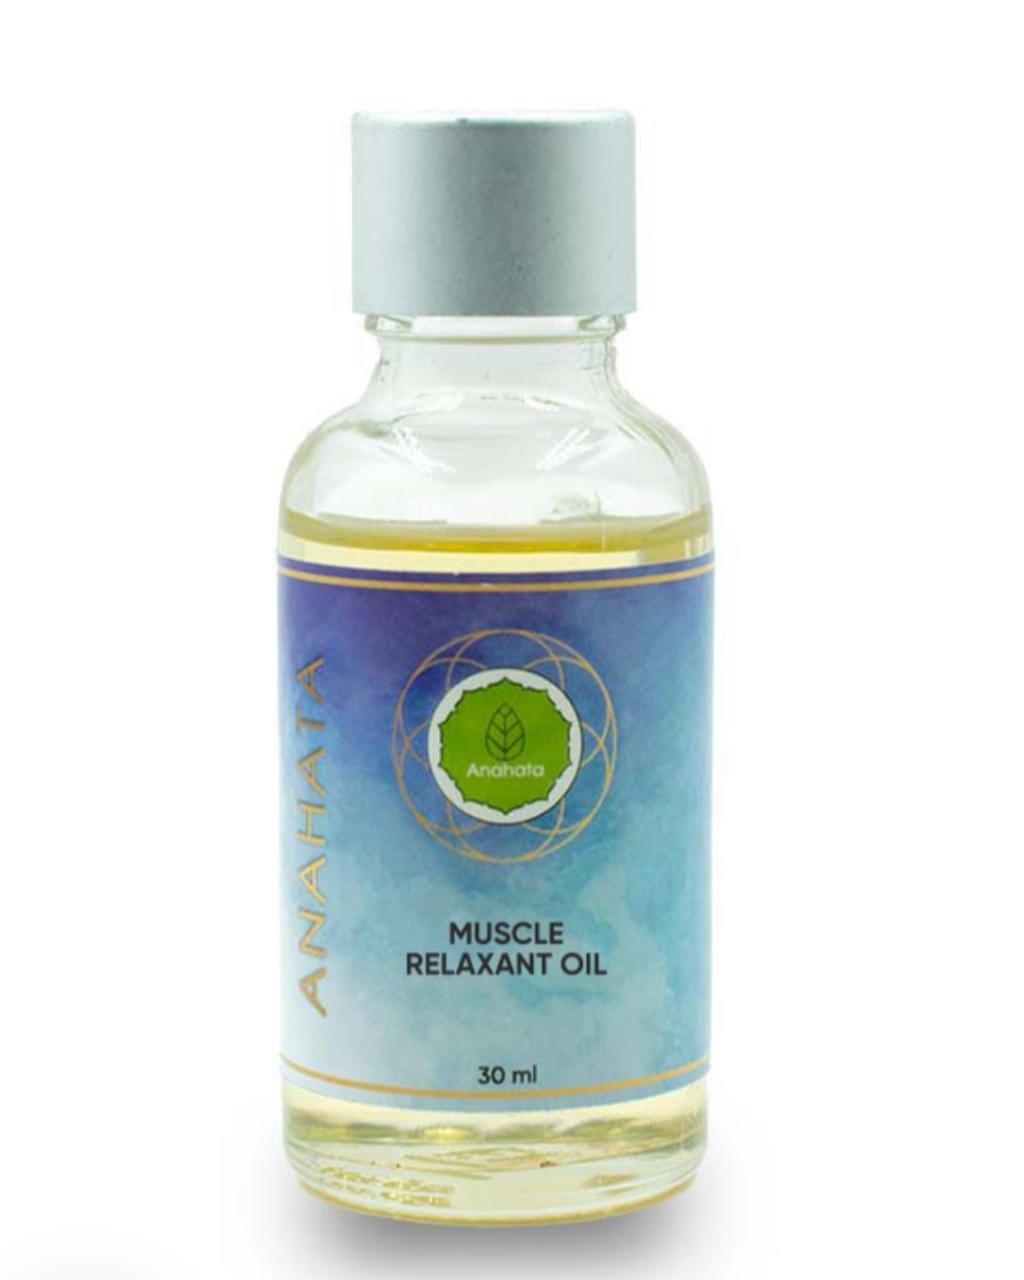 ANAHATA MUSCLE RELEXANT OIL MINI